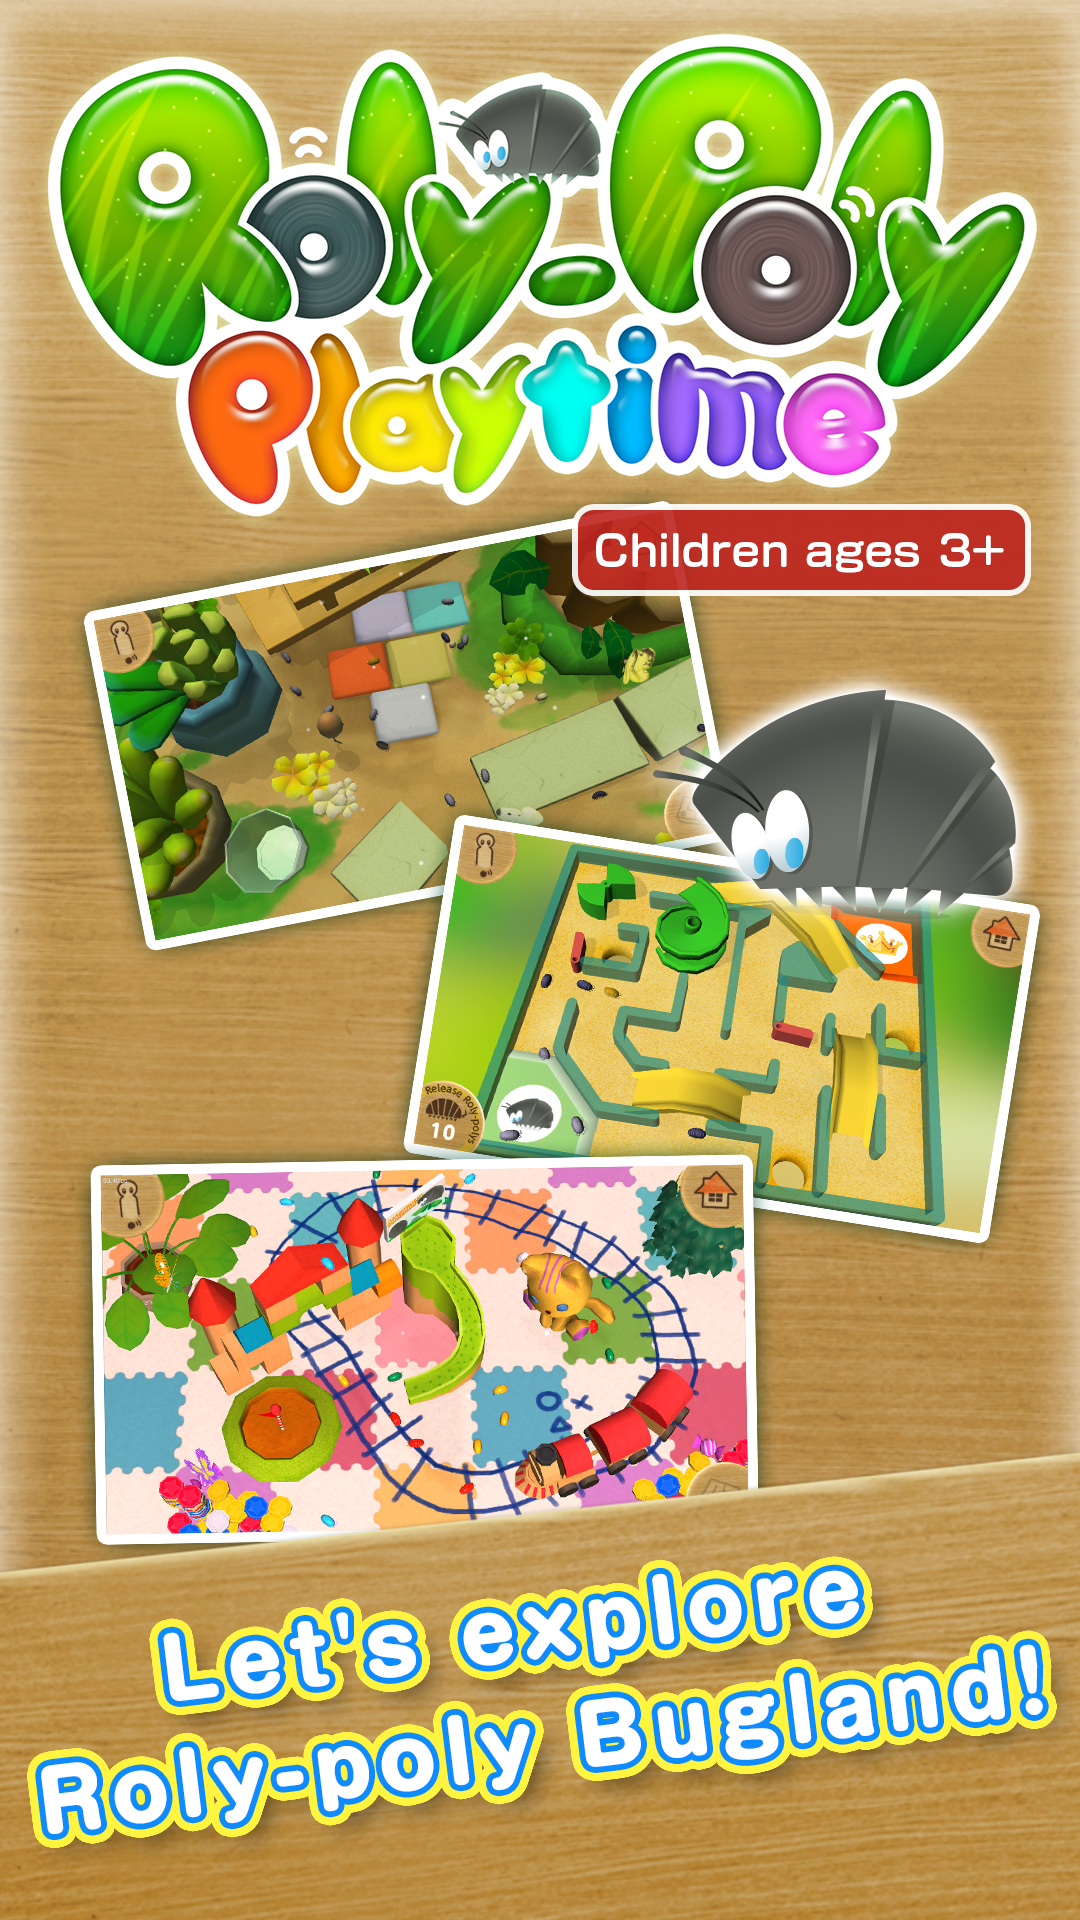 Android application Roly-poly Playtime screenshort